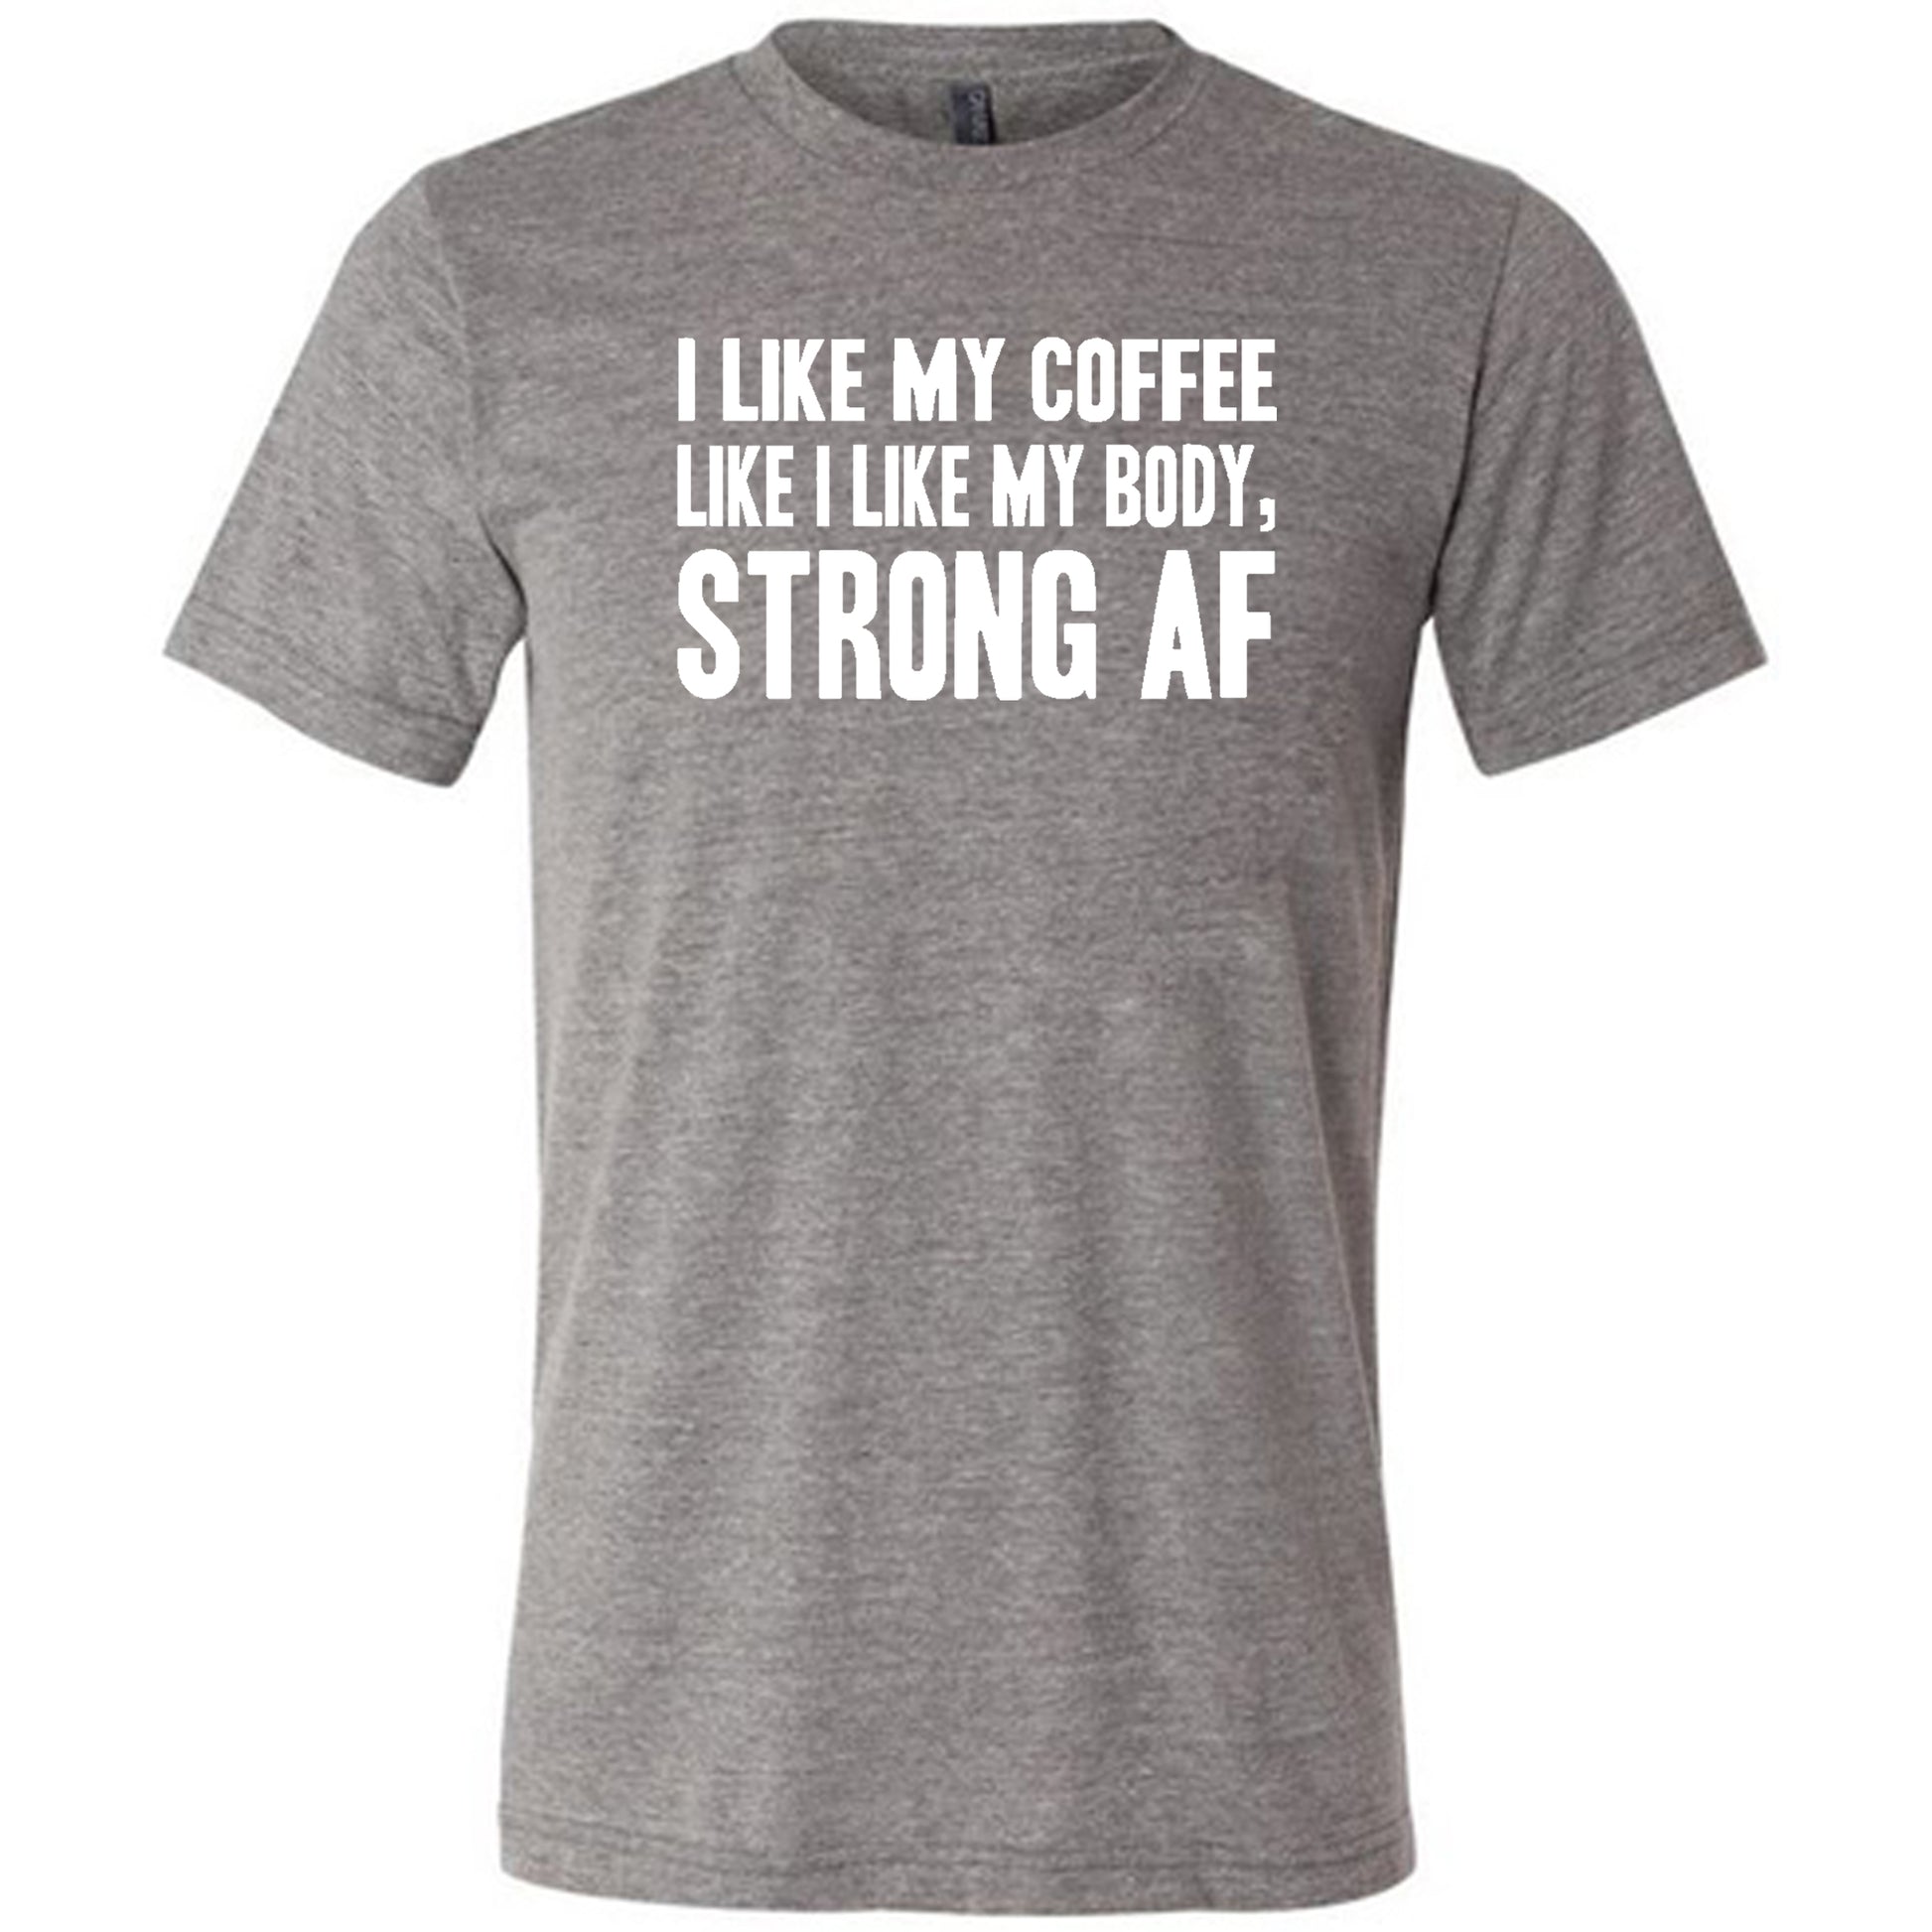 "I Like My Coffee Like I Like My Body Strong AF" quote in white lettering on grey unisex tee